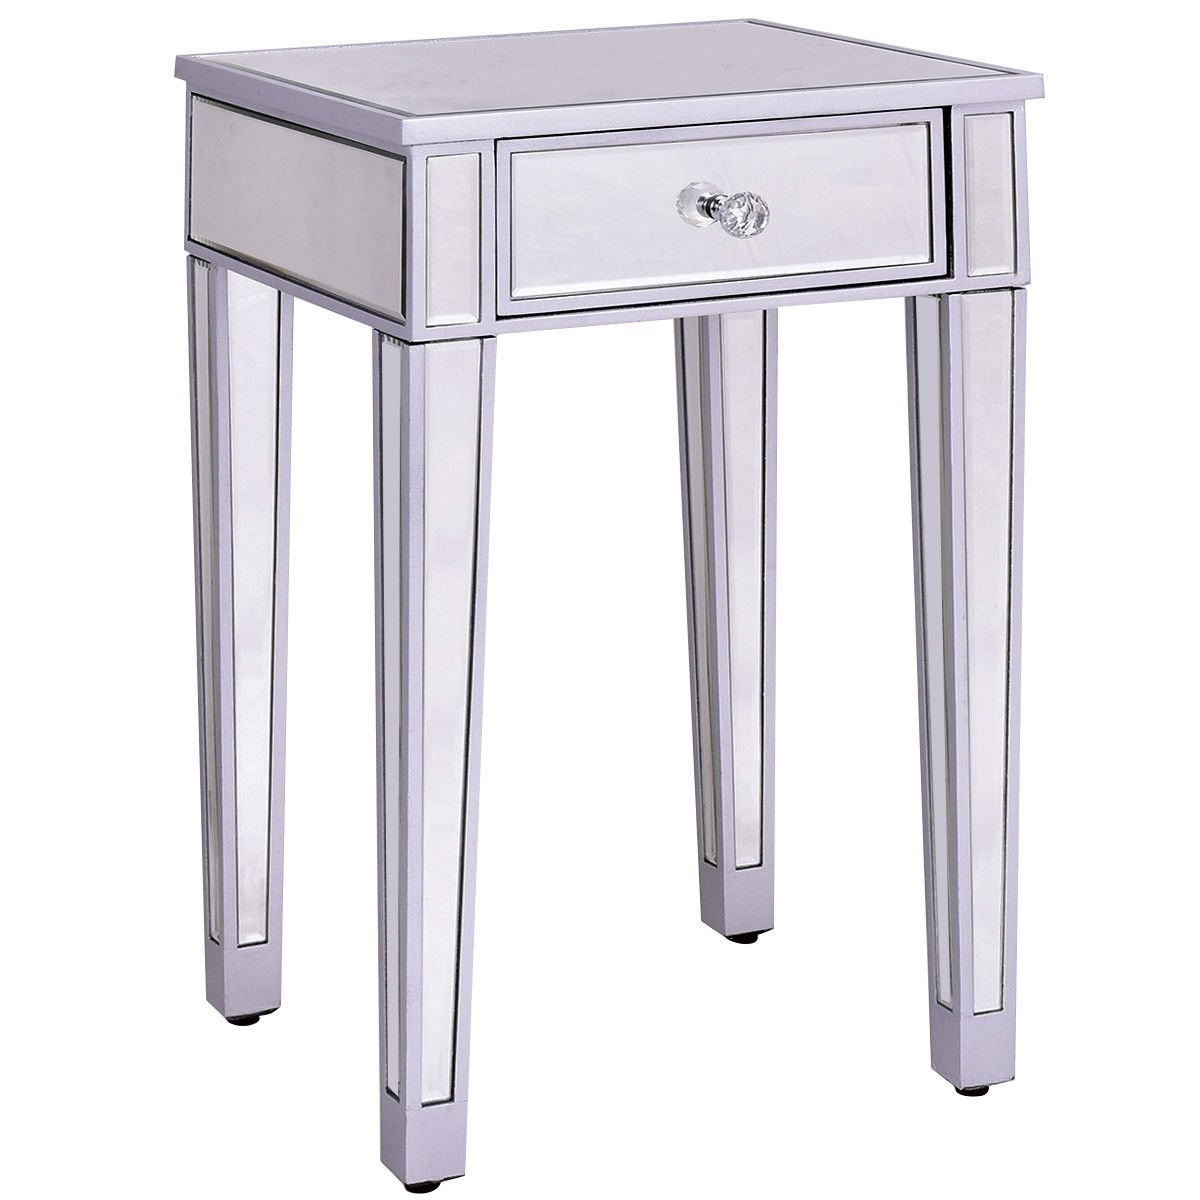 way mirrored accent table nightstand end bedside storage cabinet drawer sliver free shipping today patio umbrella base target bar stools phone stand for desk rustic tables with